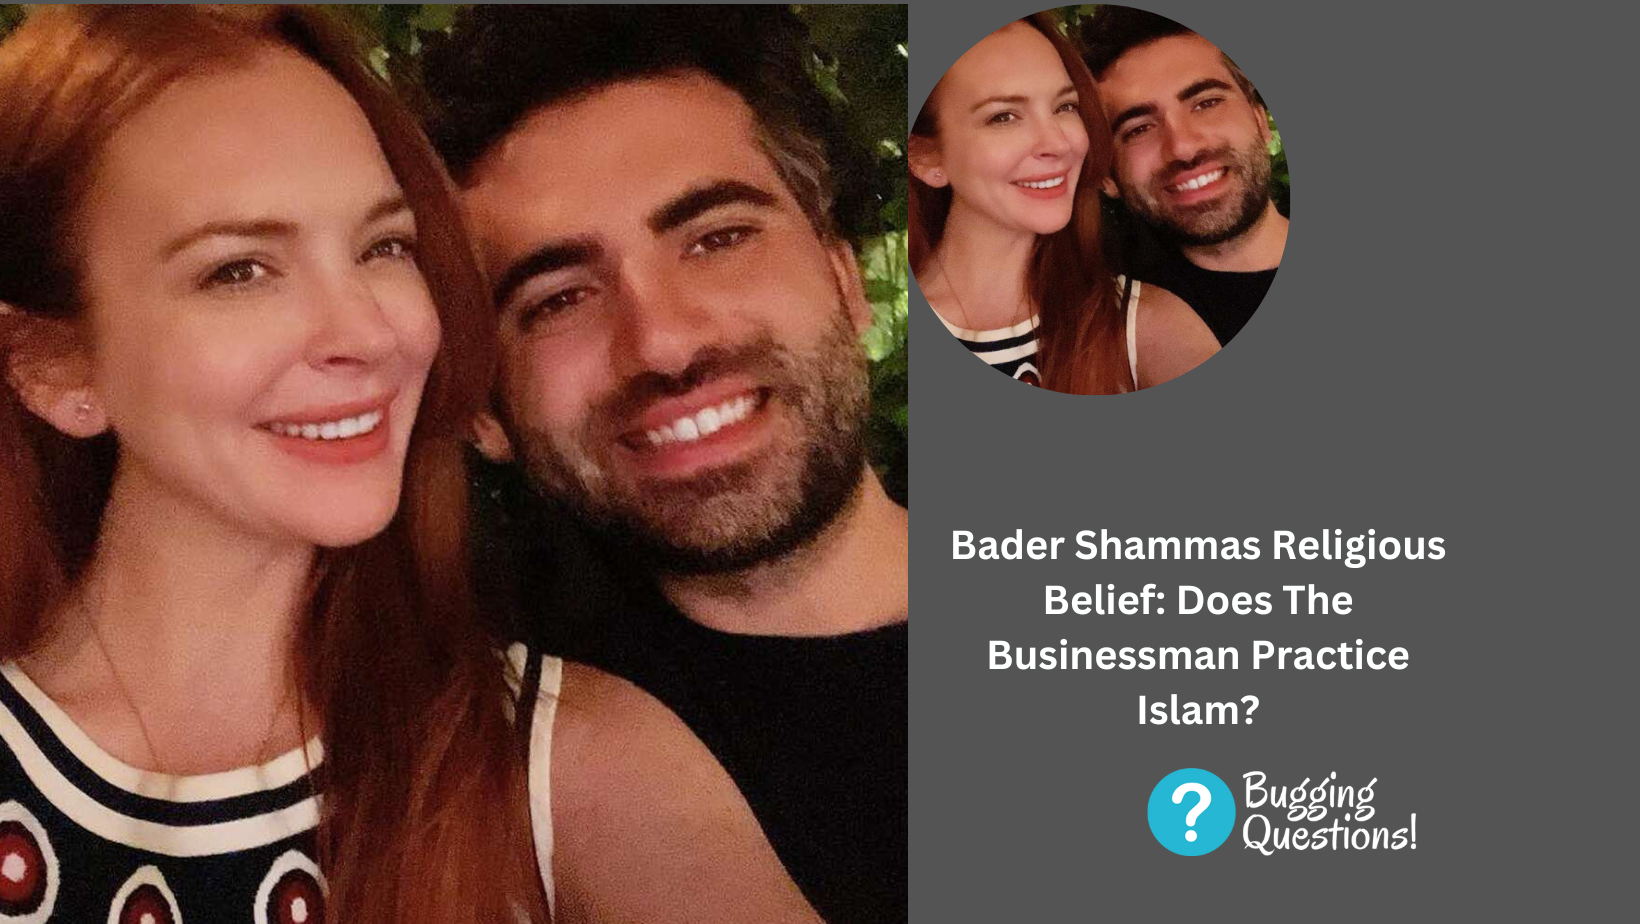 Bader Shammas Religious Belief: Does The Businessman Practice Islam?